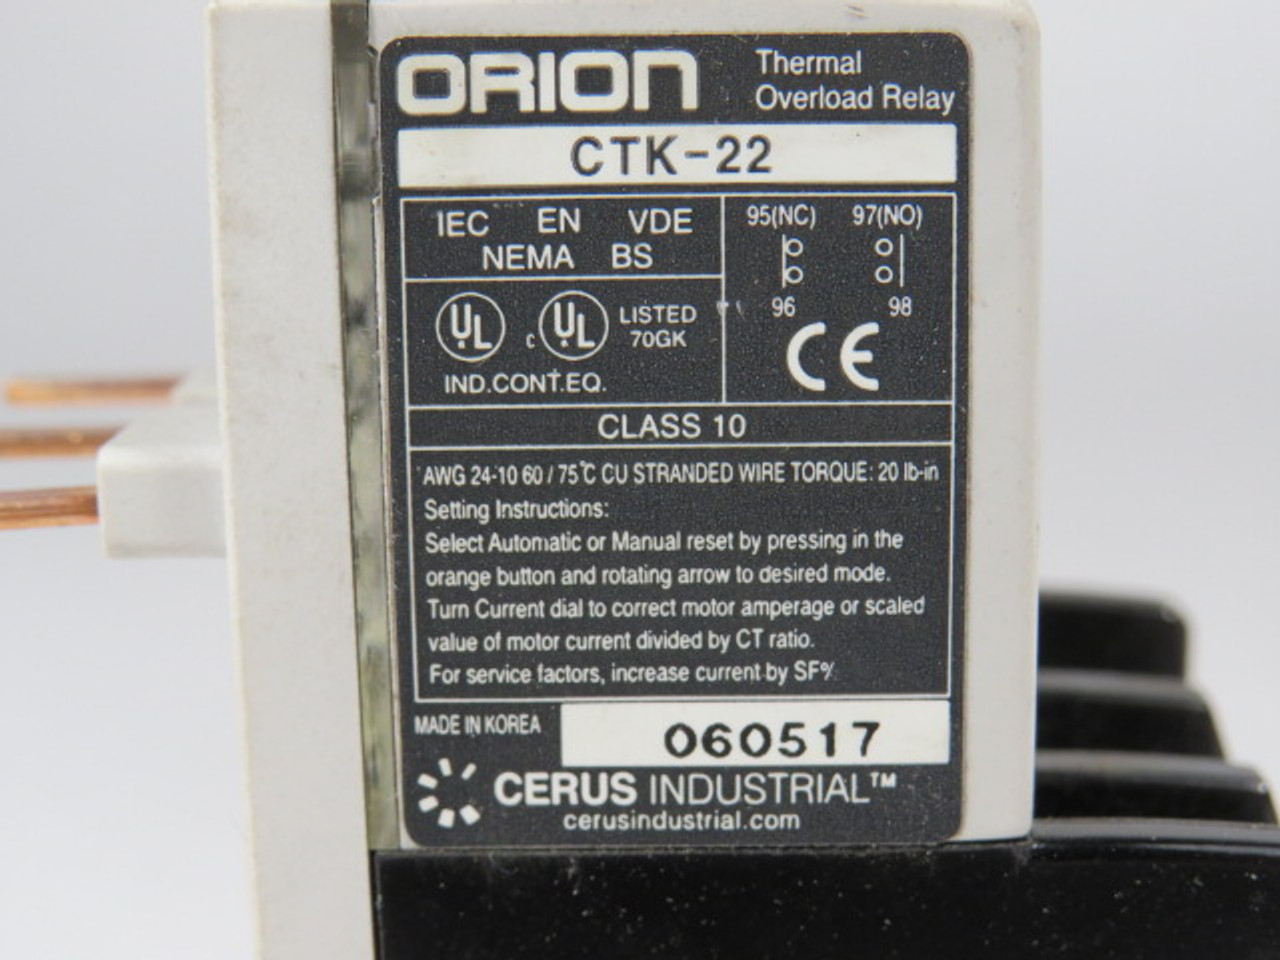 Cerus Orion CTK-22/3-4A Thermal Overload Relay 2.5-4A Range USED